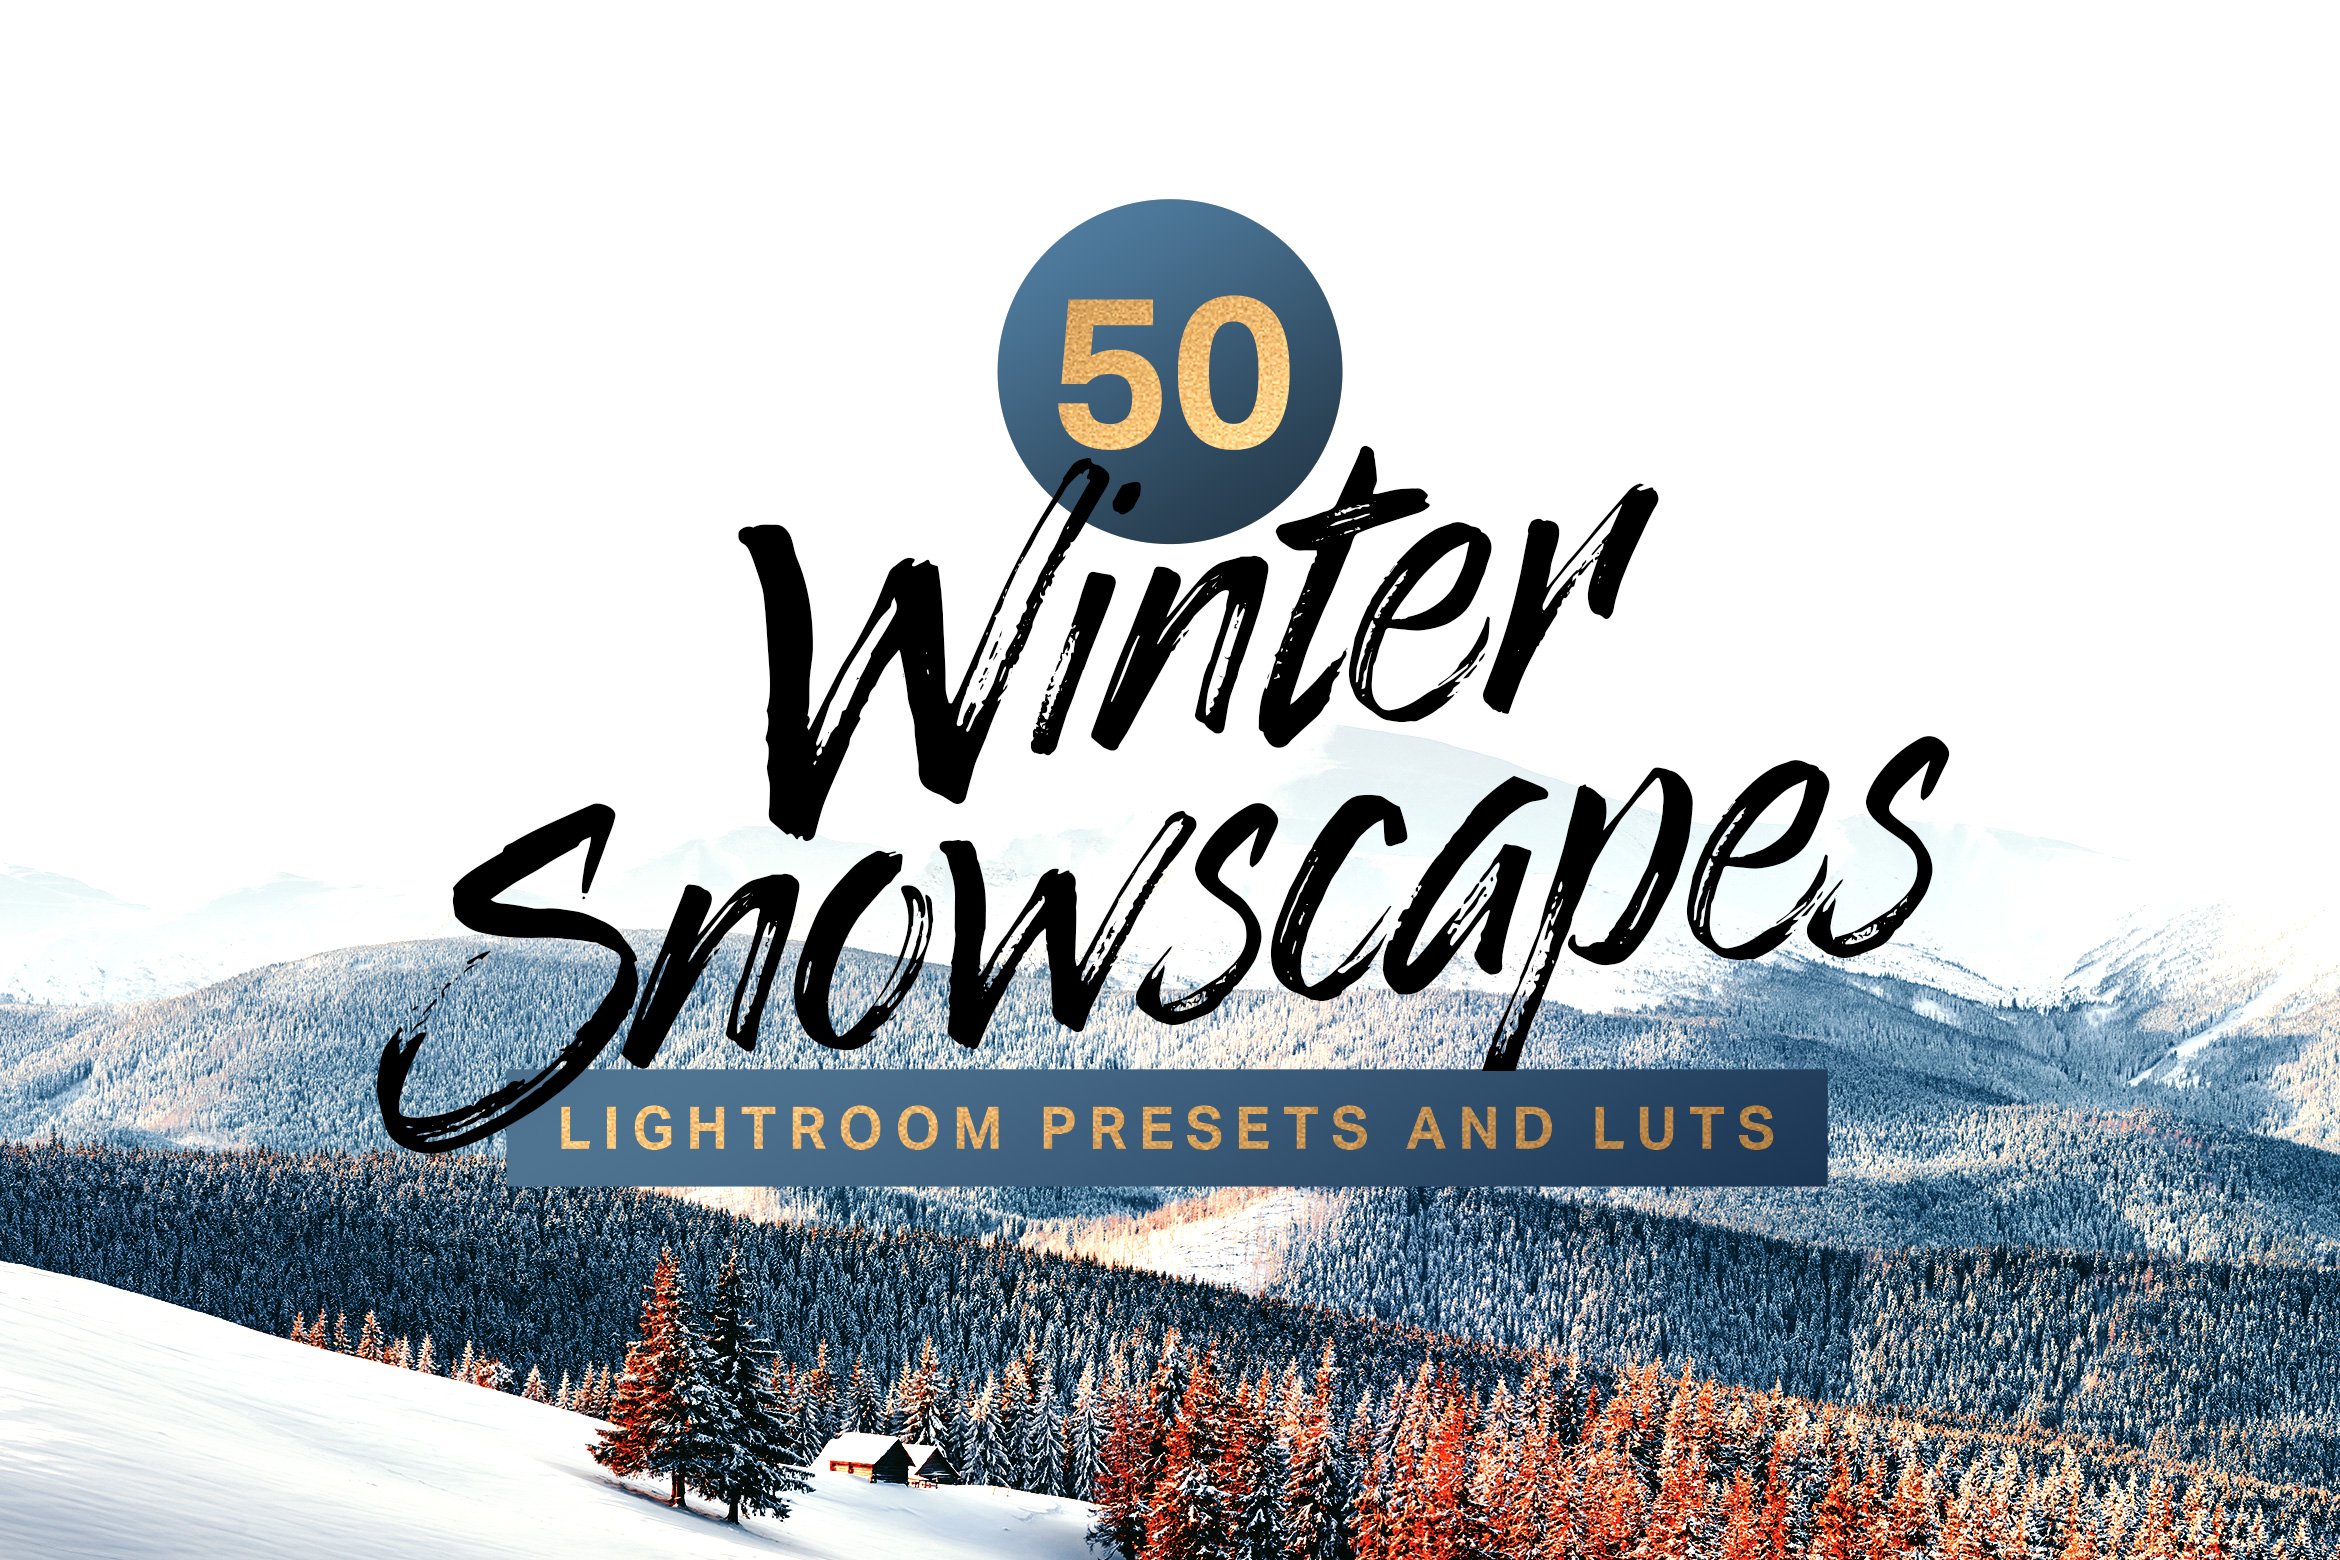 50 Winter Lightroom Presets and LUTscover image.